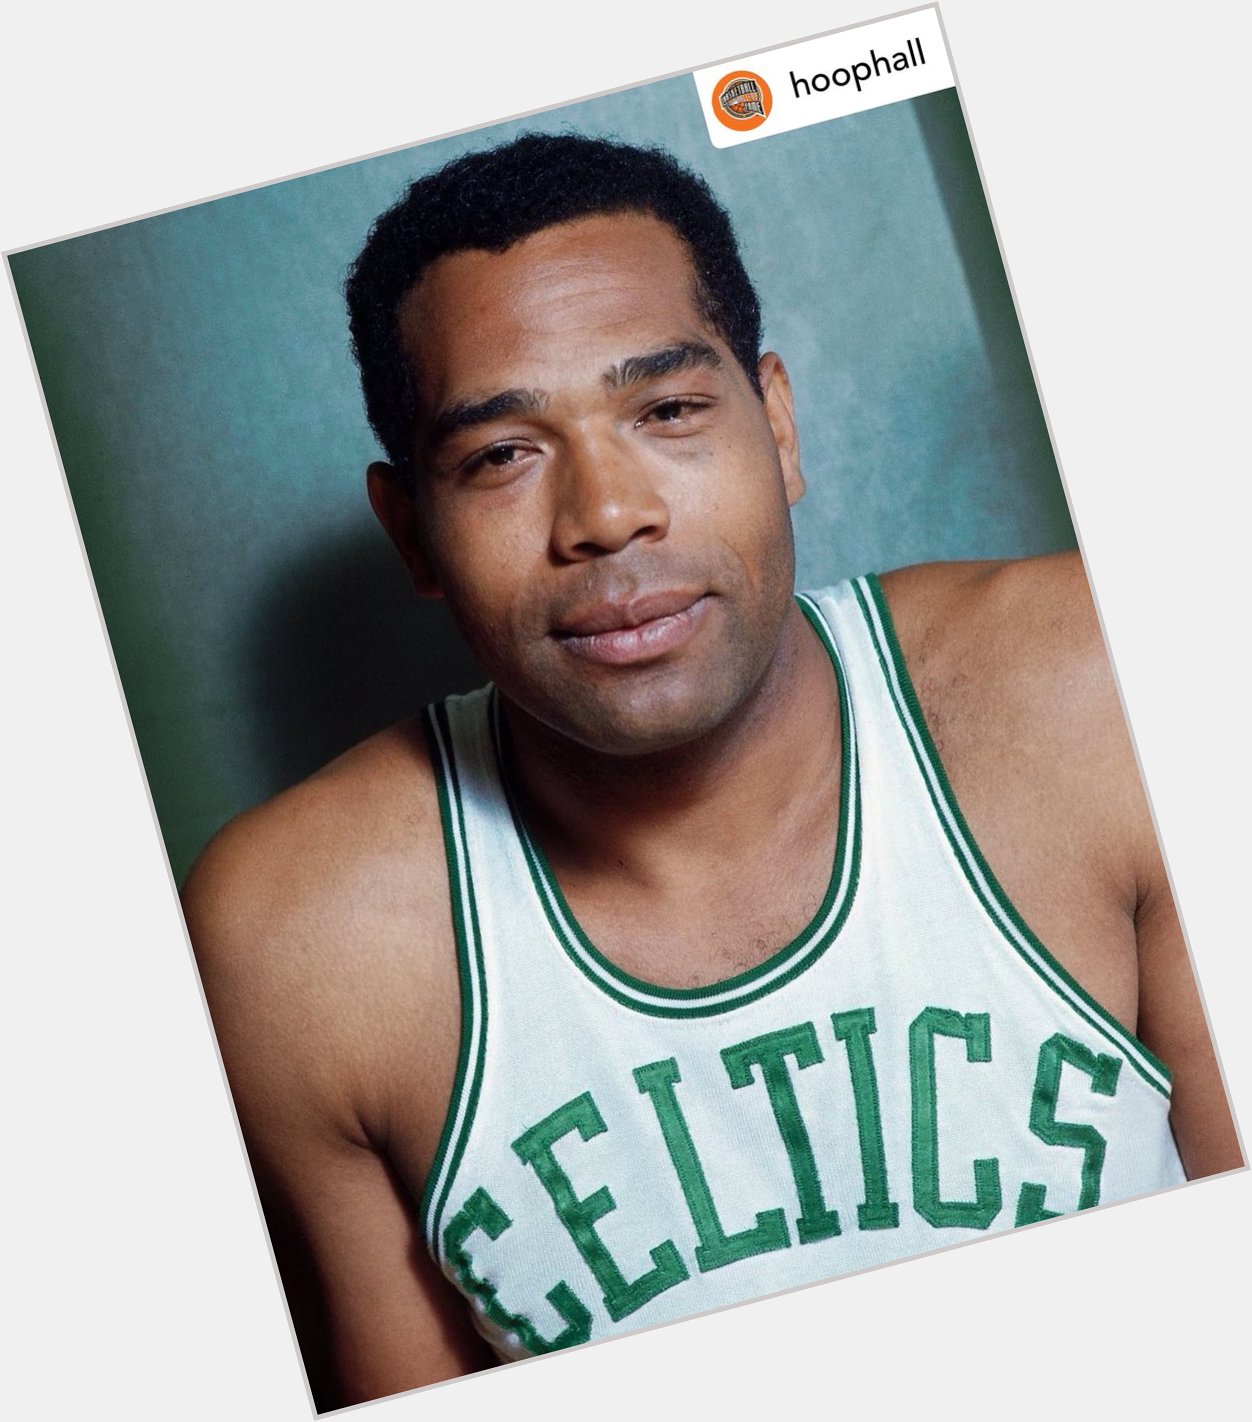  Double tap to wish Wayne Embry a Happy Birthday!   : Dick Raphael/NBAE via Getty Images 